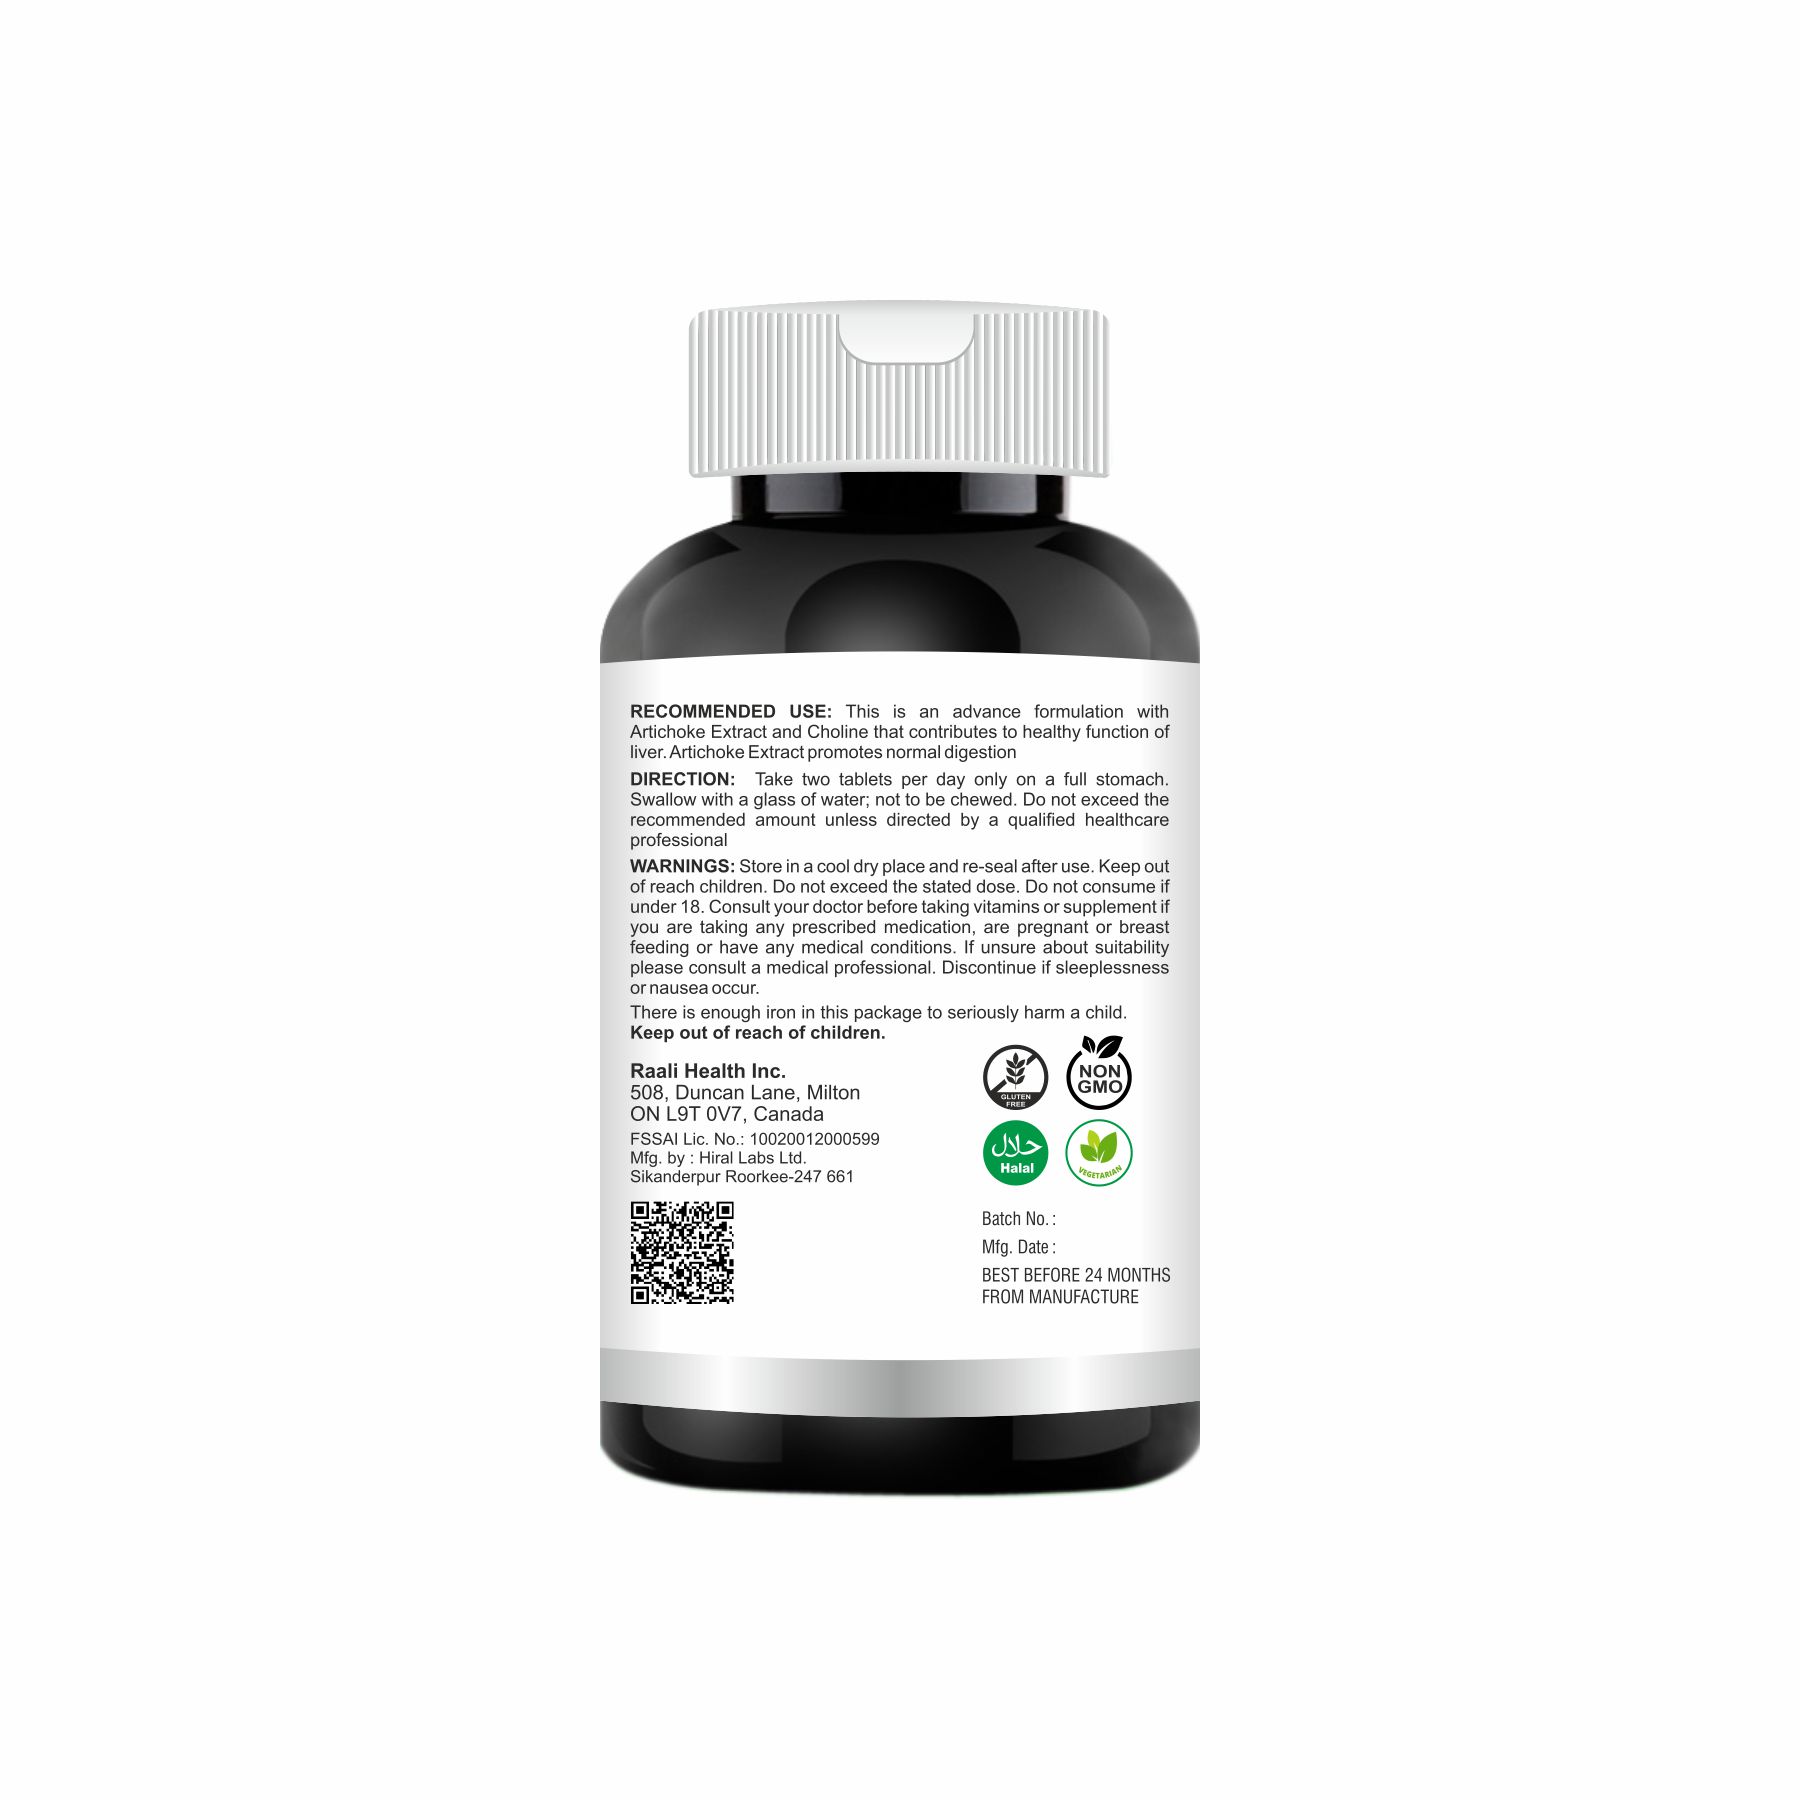 Raali health, heart health, liver booster, product for canada